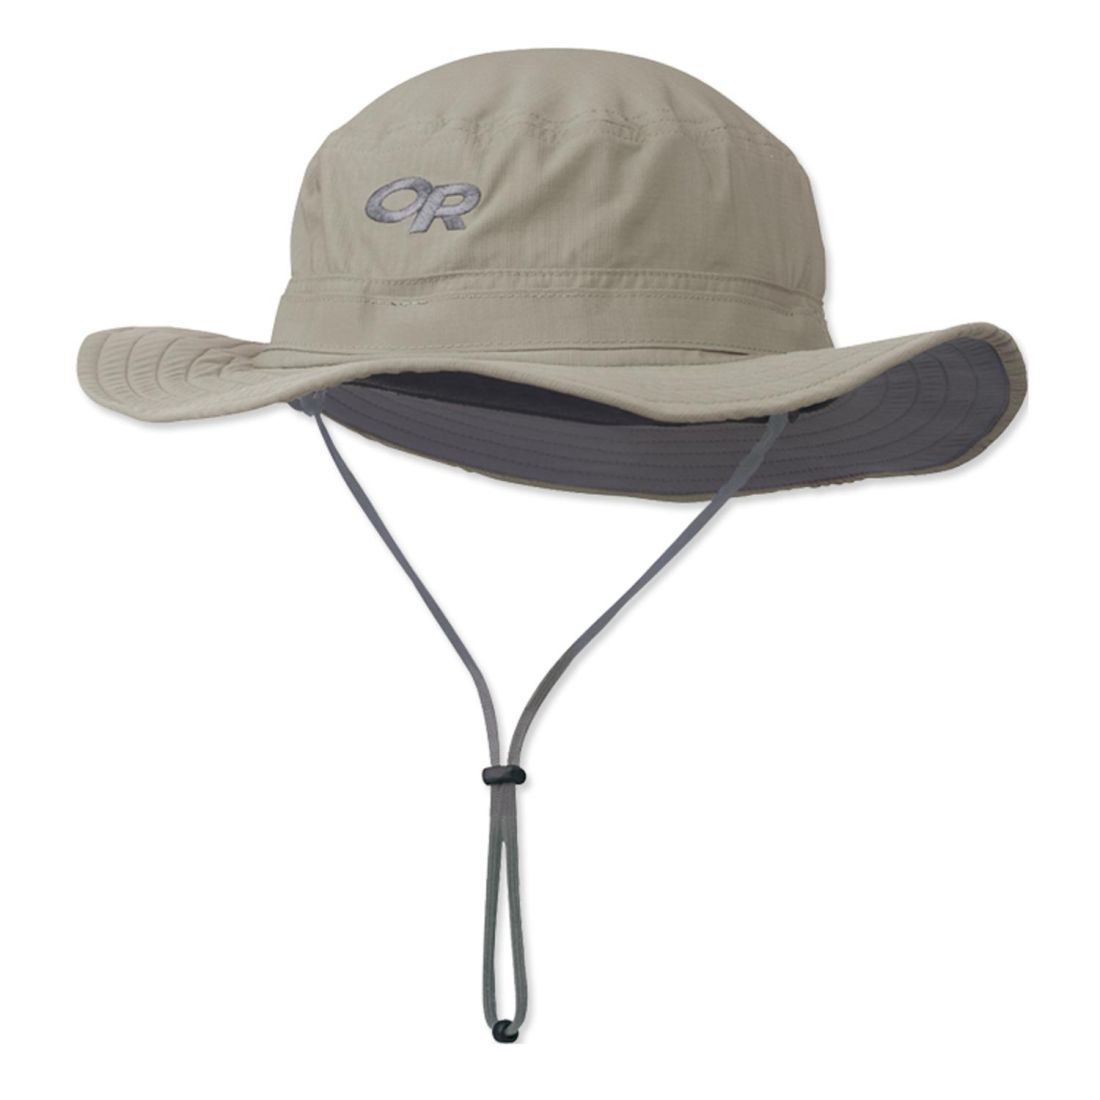 Outdoor research Шляпа Outdoor research Helios Sun Hat